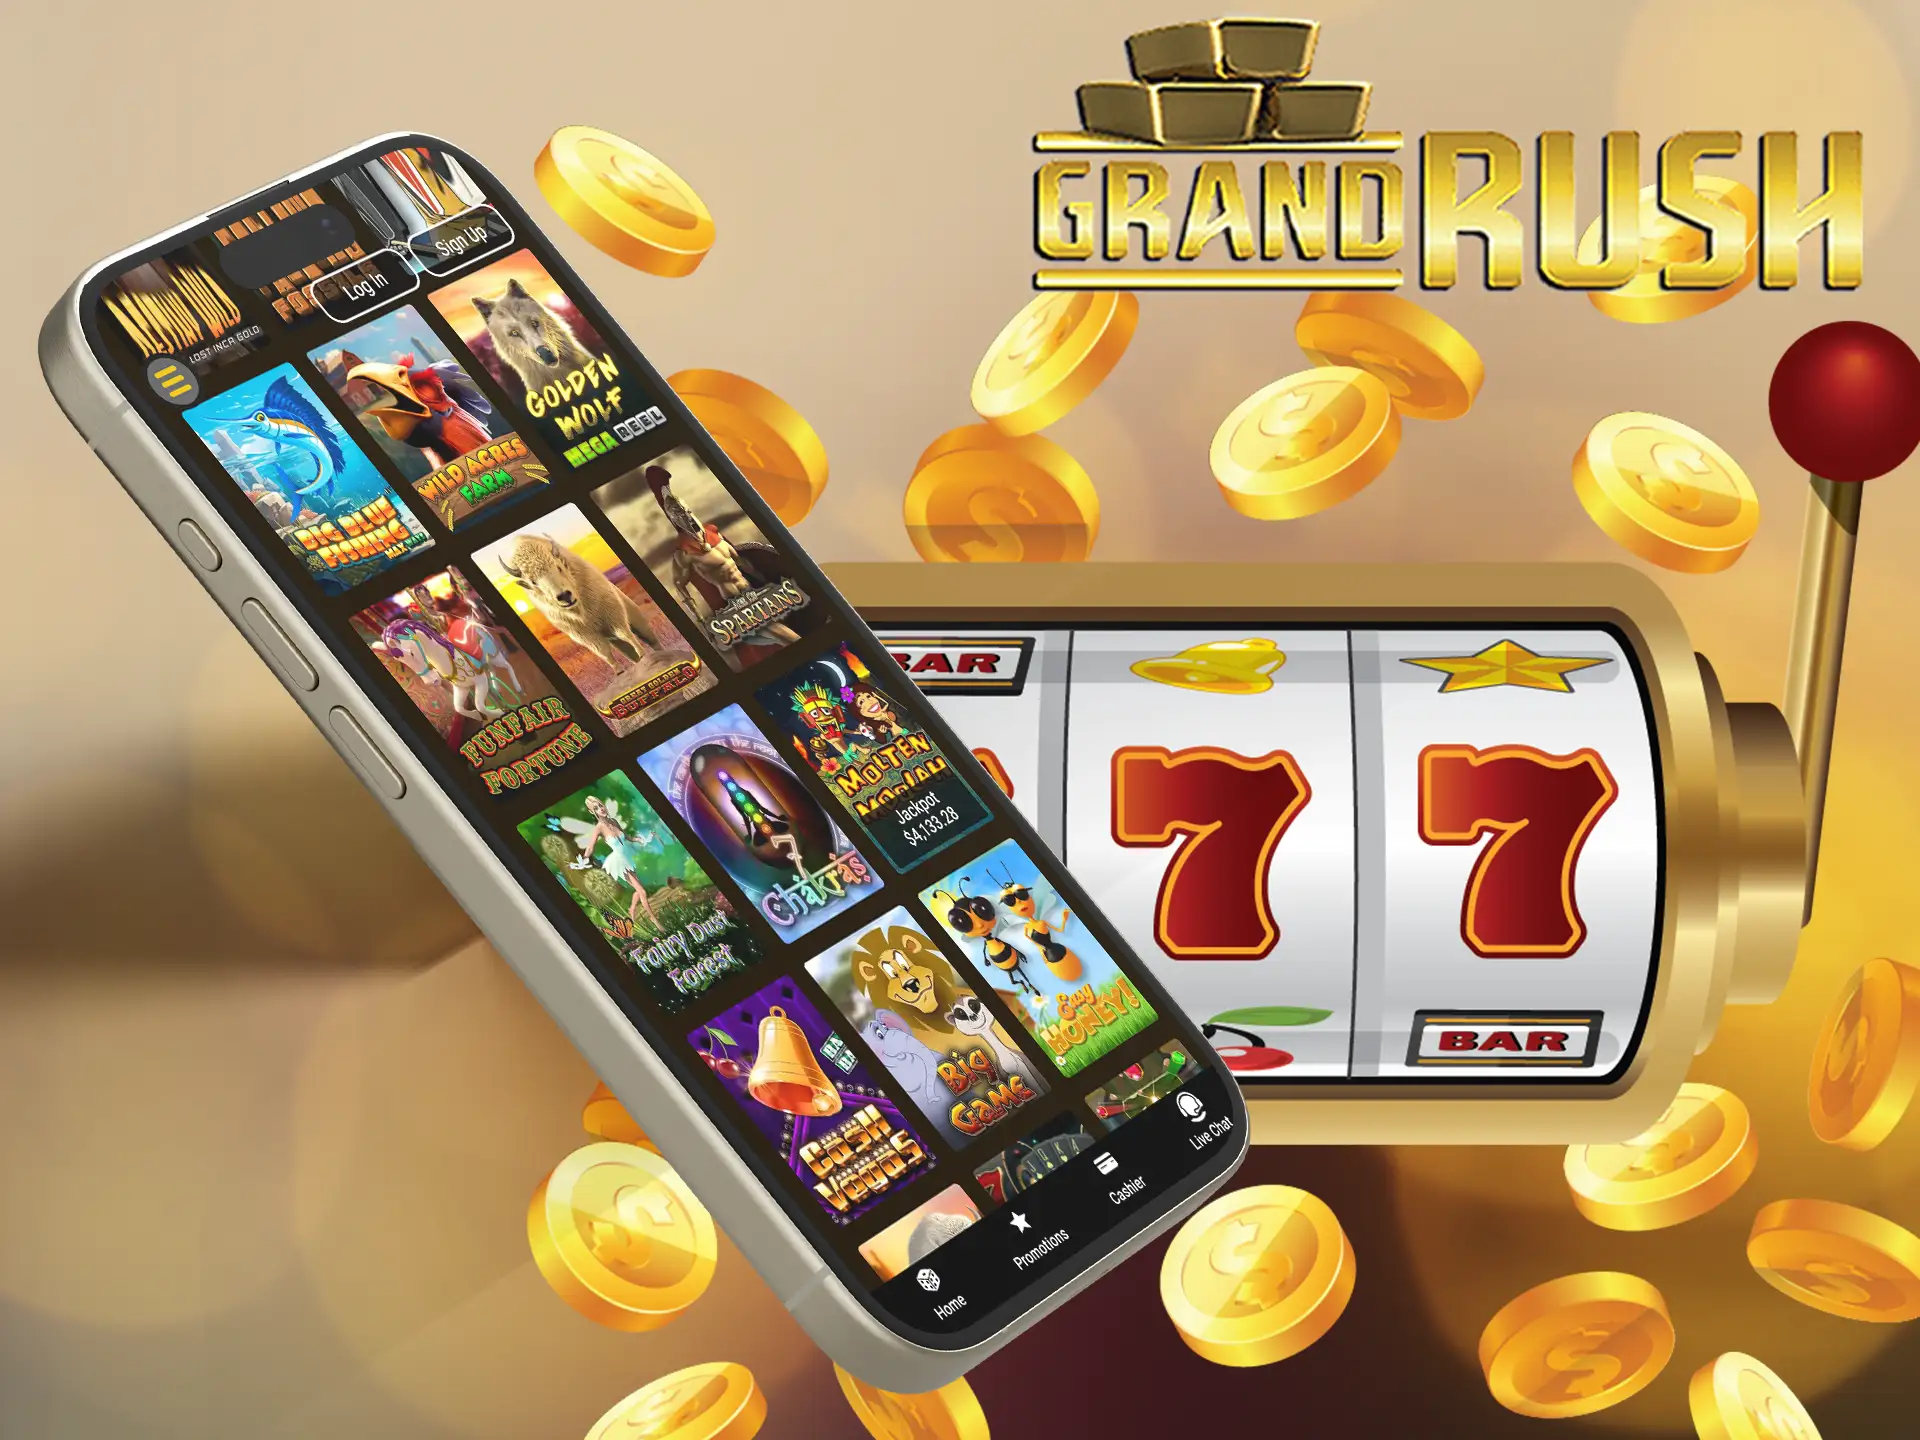 Play slots at Grand Rush Casino through Android and iOS devices.